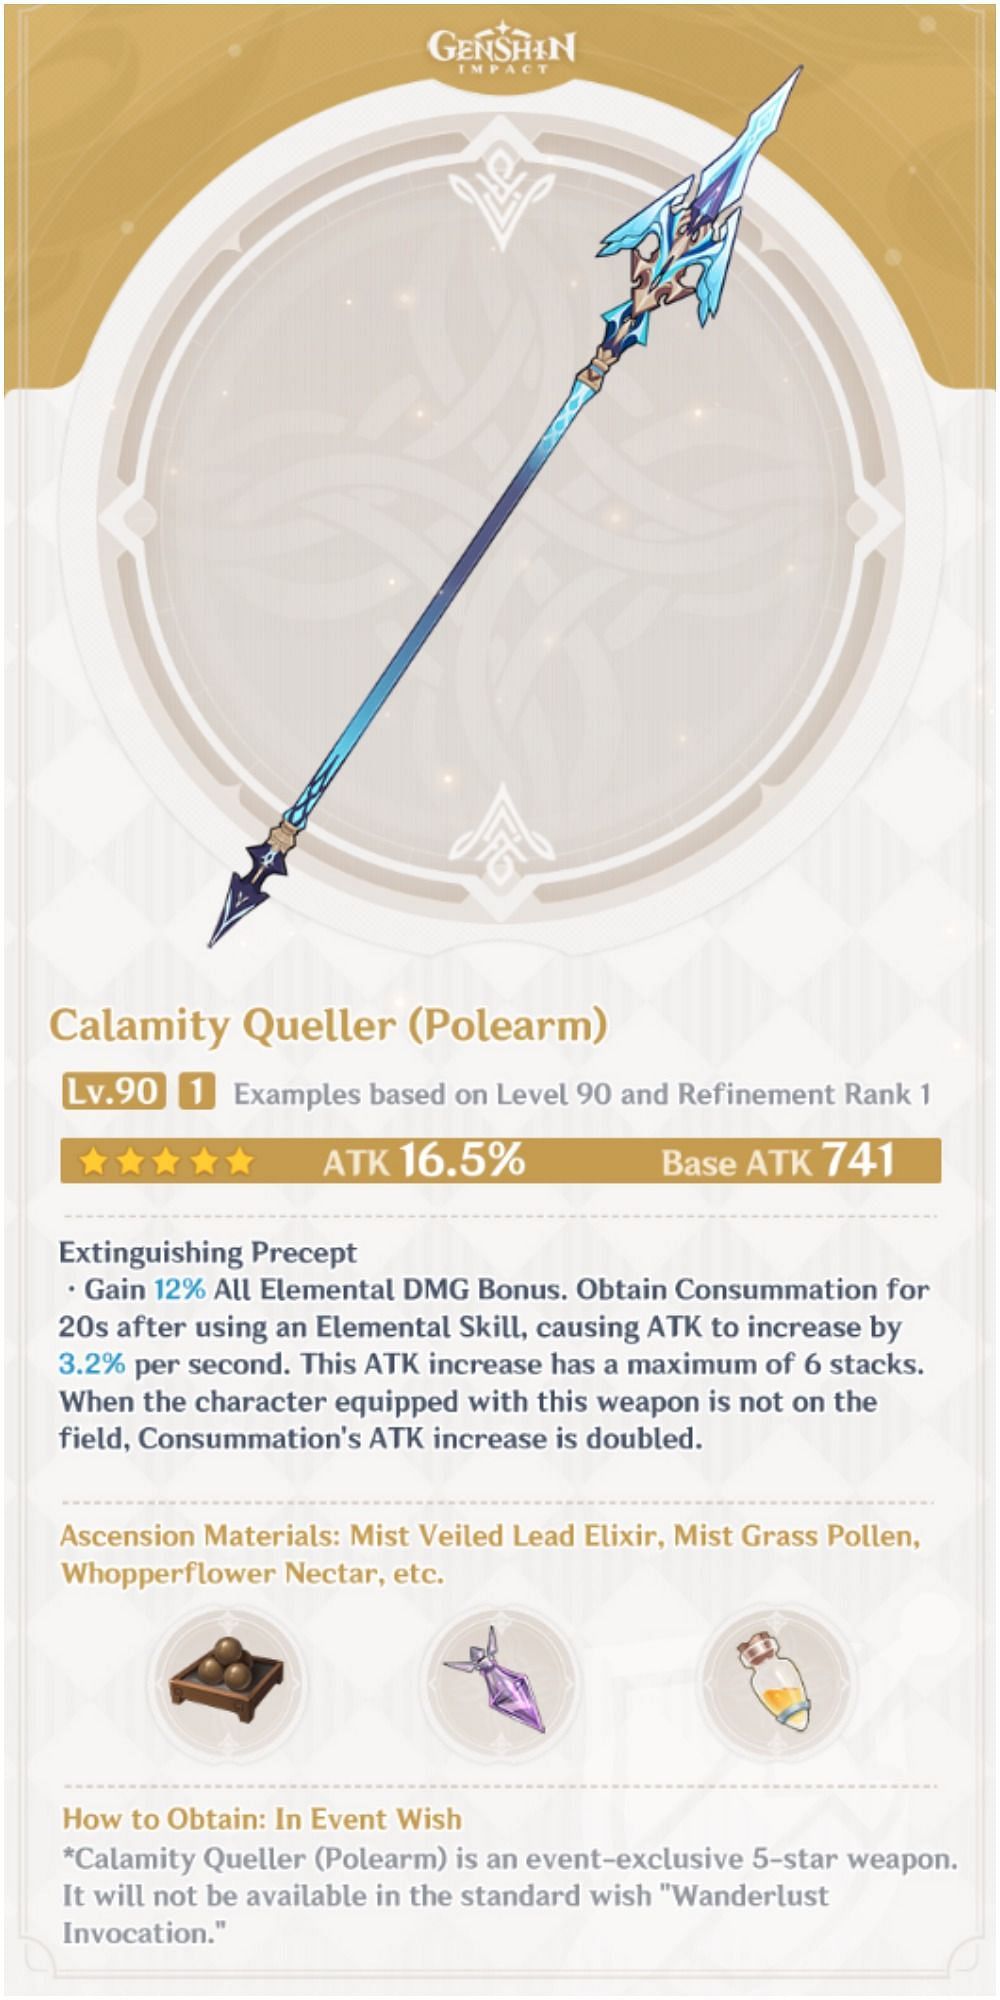 Calamity Queller is the new upcoming weapon in Genshin Impact (Image via Genshin Impact)